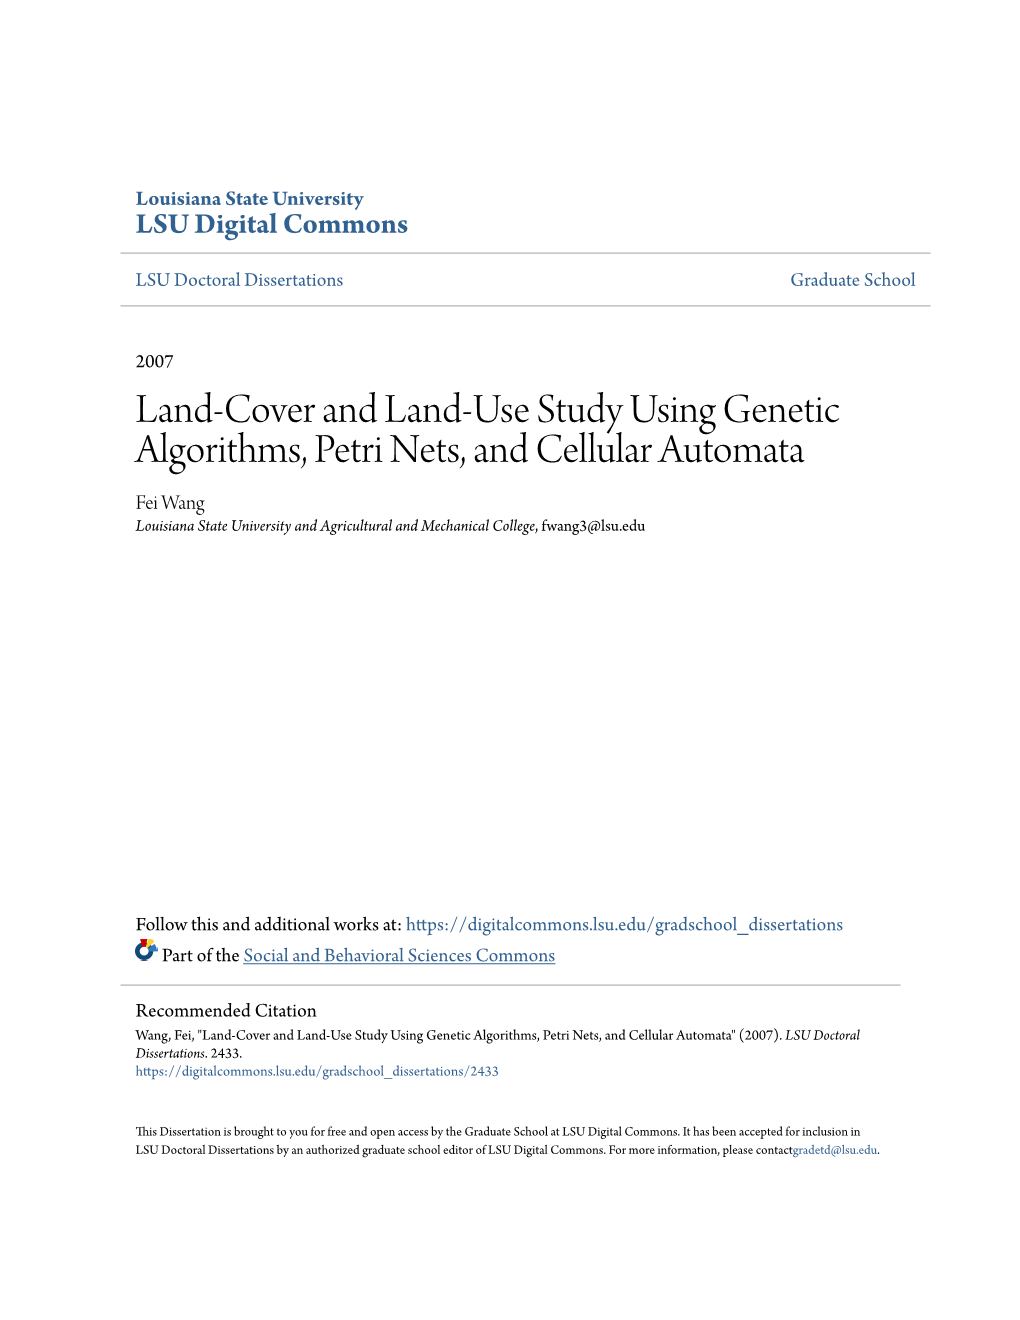 Land-Cover and Land-Use Study Using Genetic Algorithms, Petri